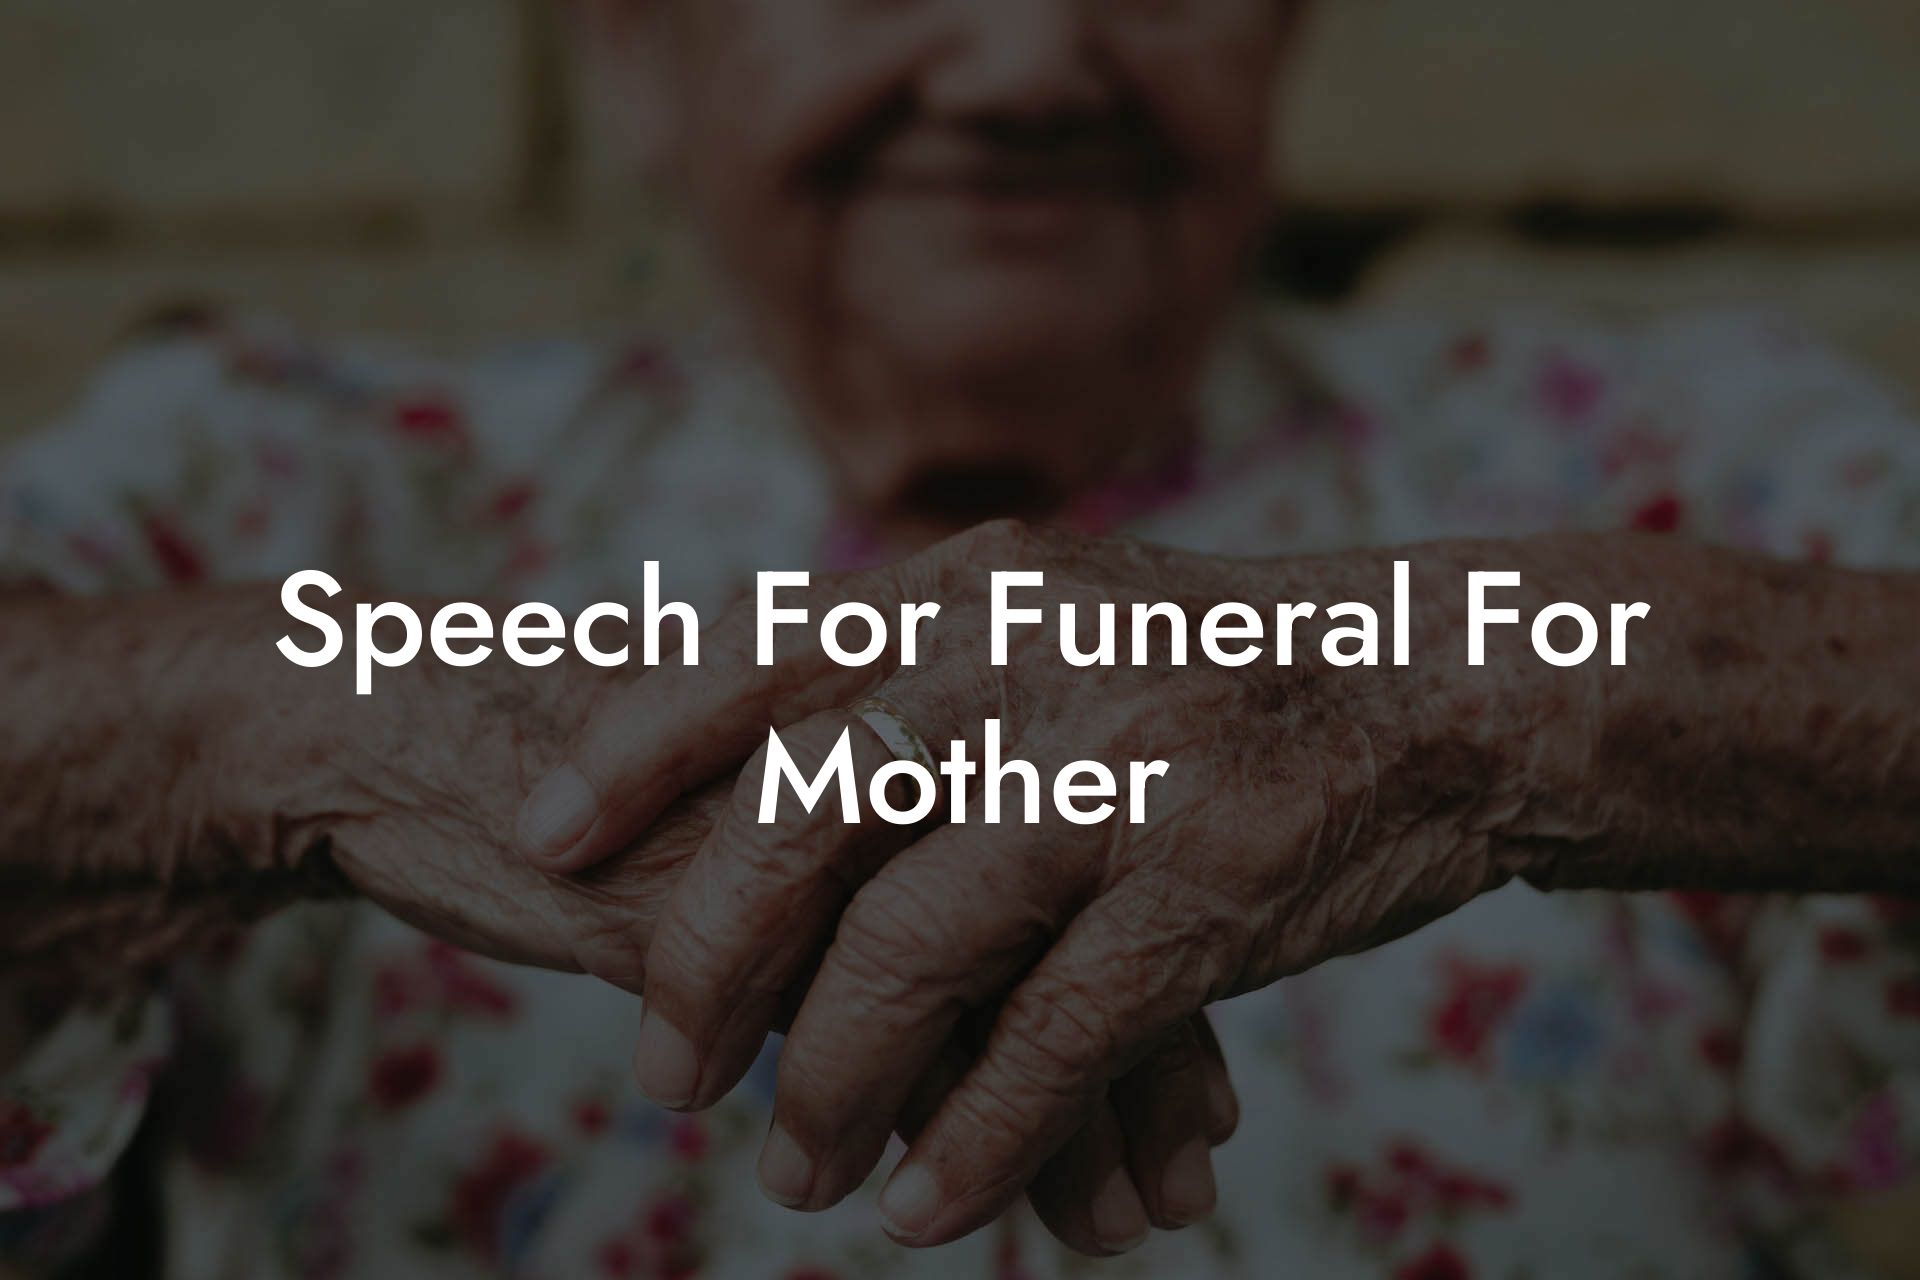 Speech For Funeral For Mother